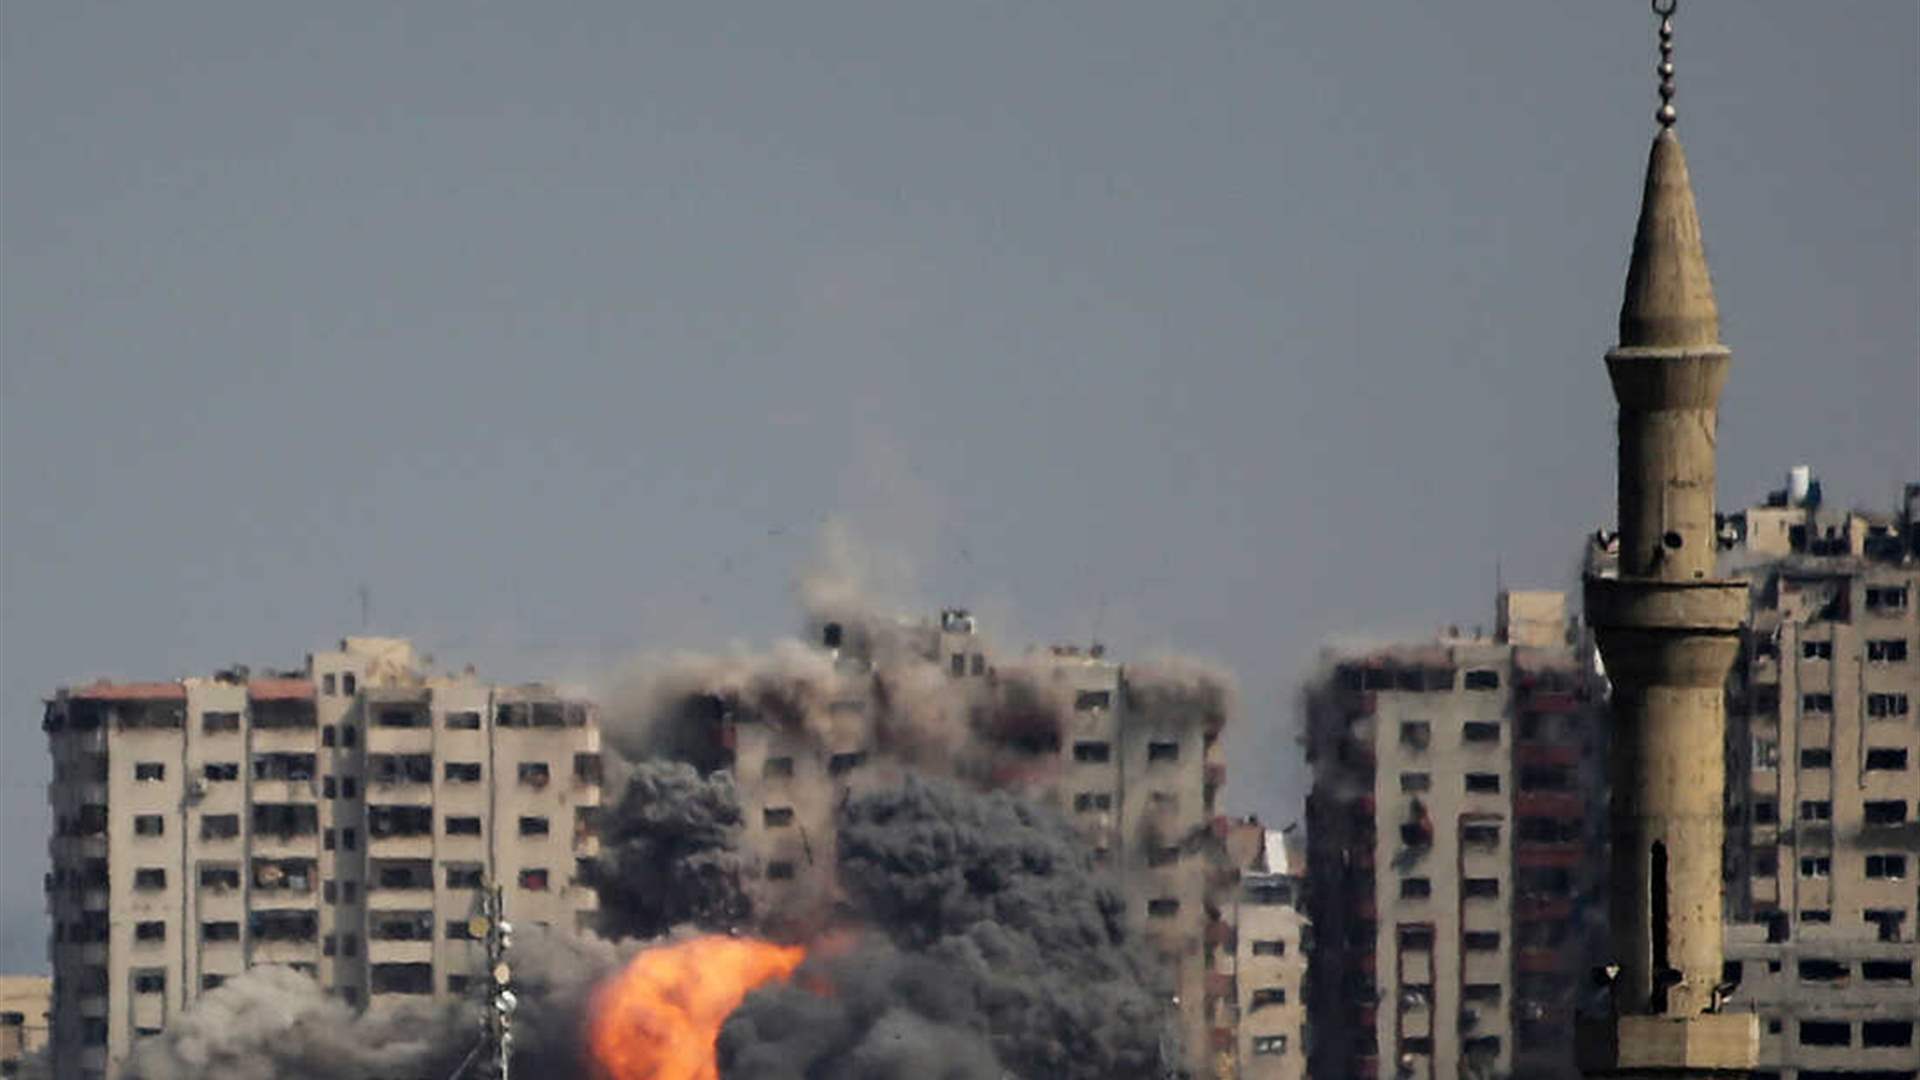 1,537 killed in Gaza, including 500 children, according to Hamas Health Ministry 